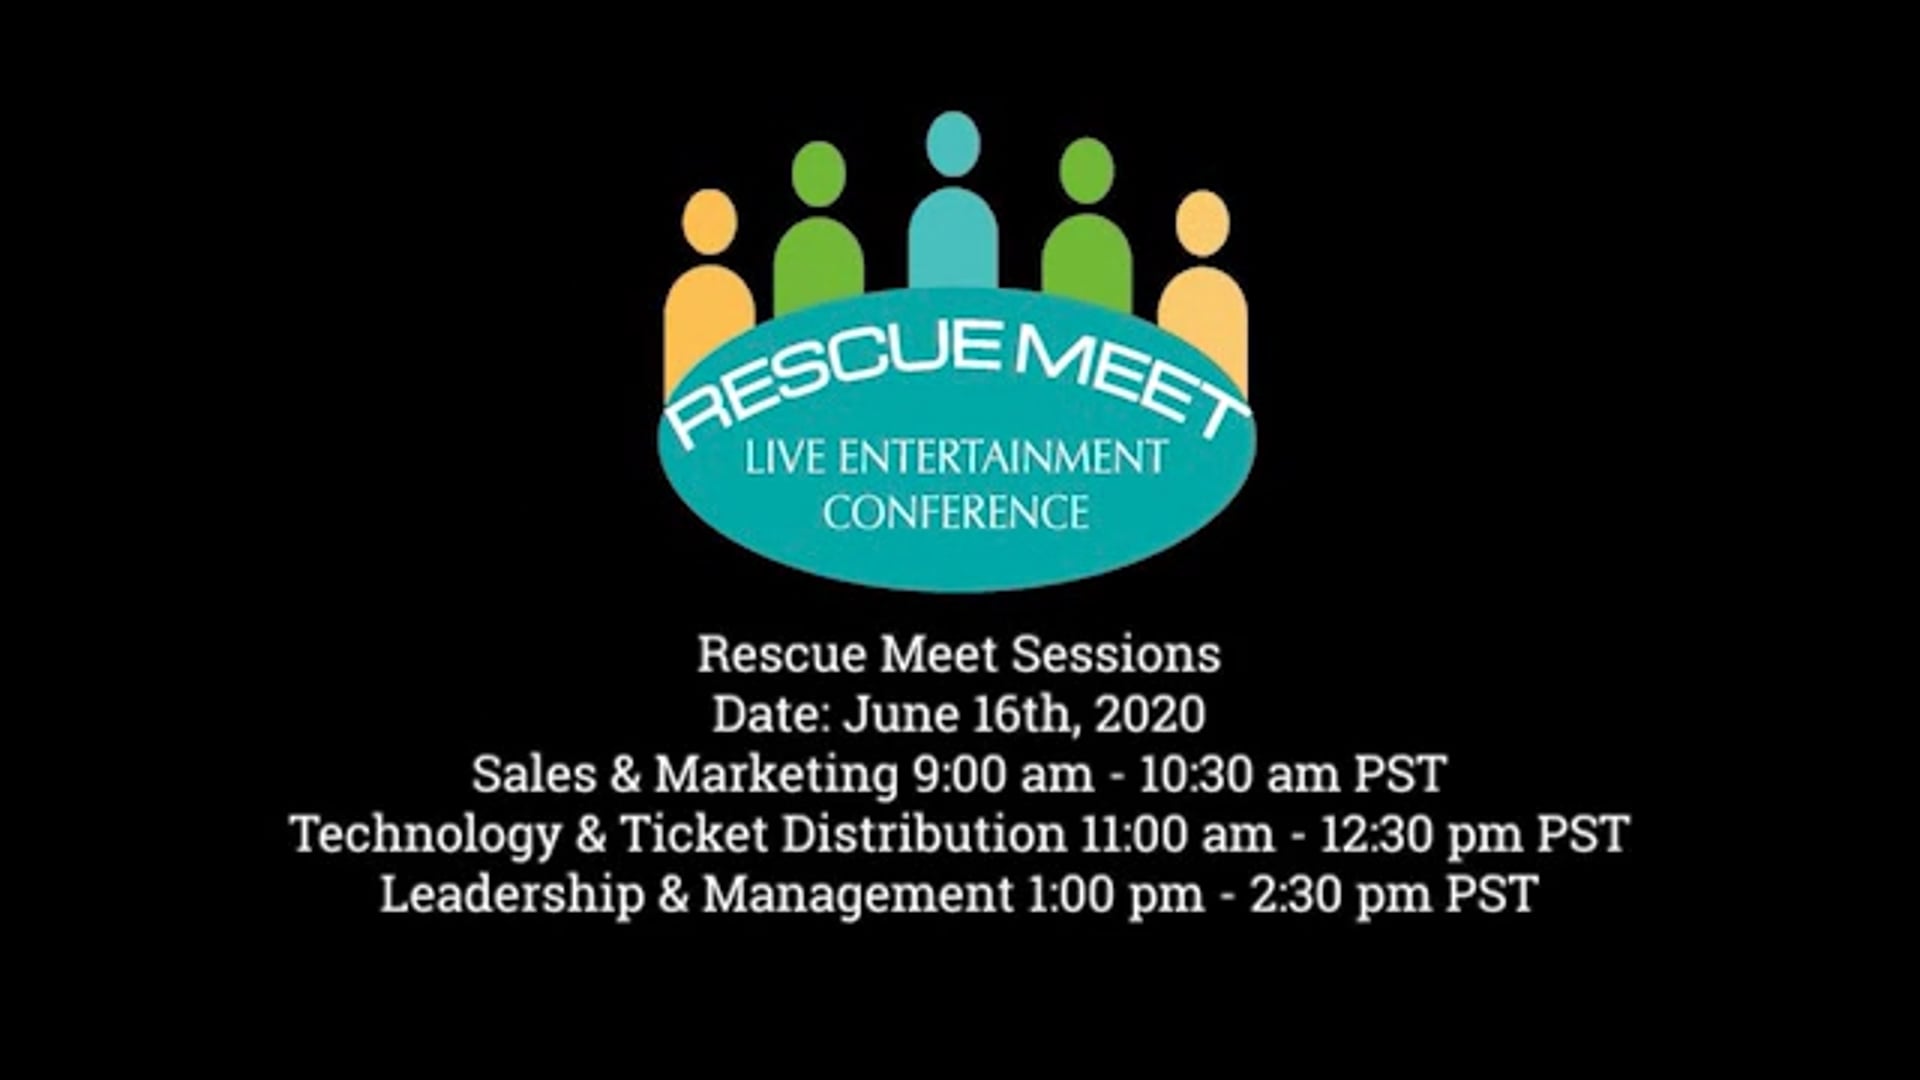 Rescue Meet Sessions: Technology & Ticket Distribution